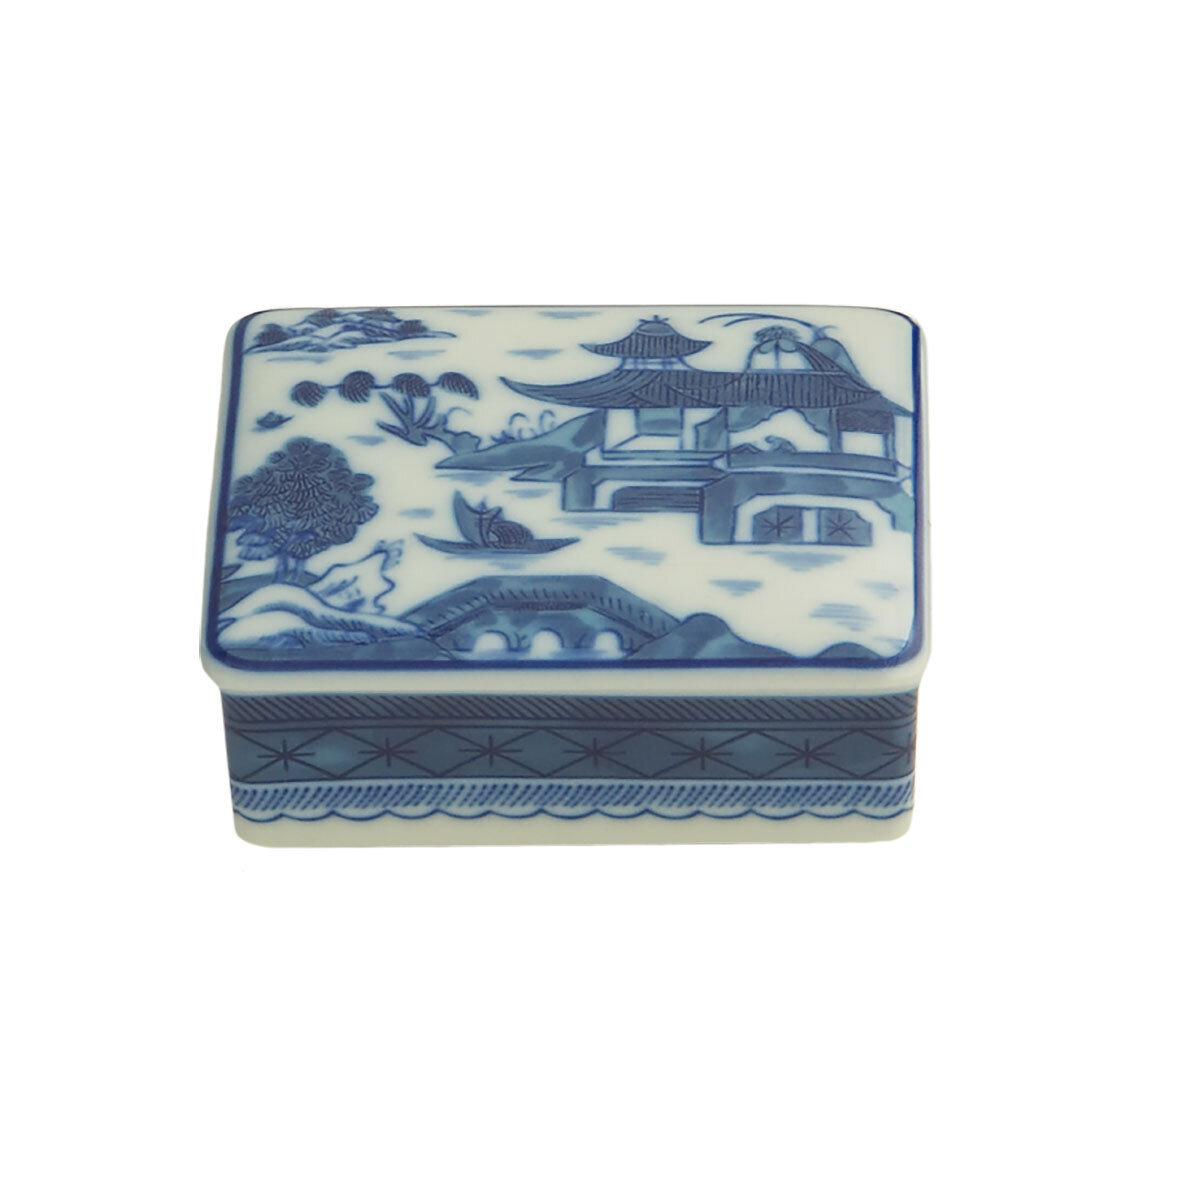 Mottahedeh Blue Canton Rectangular Covered Box Small HC82